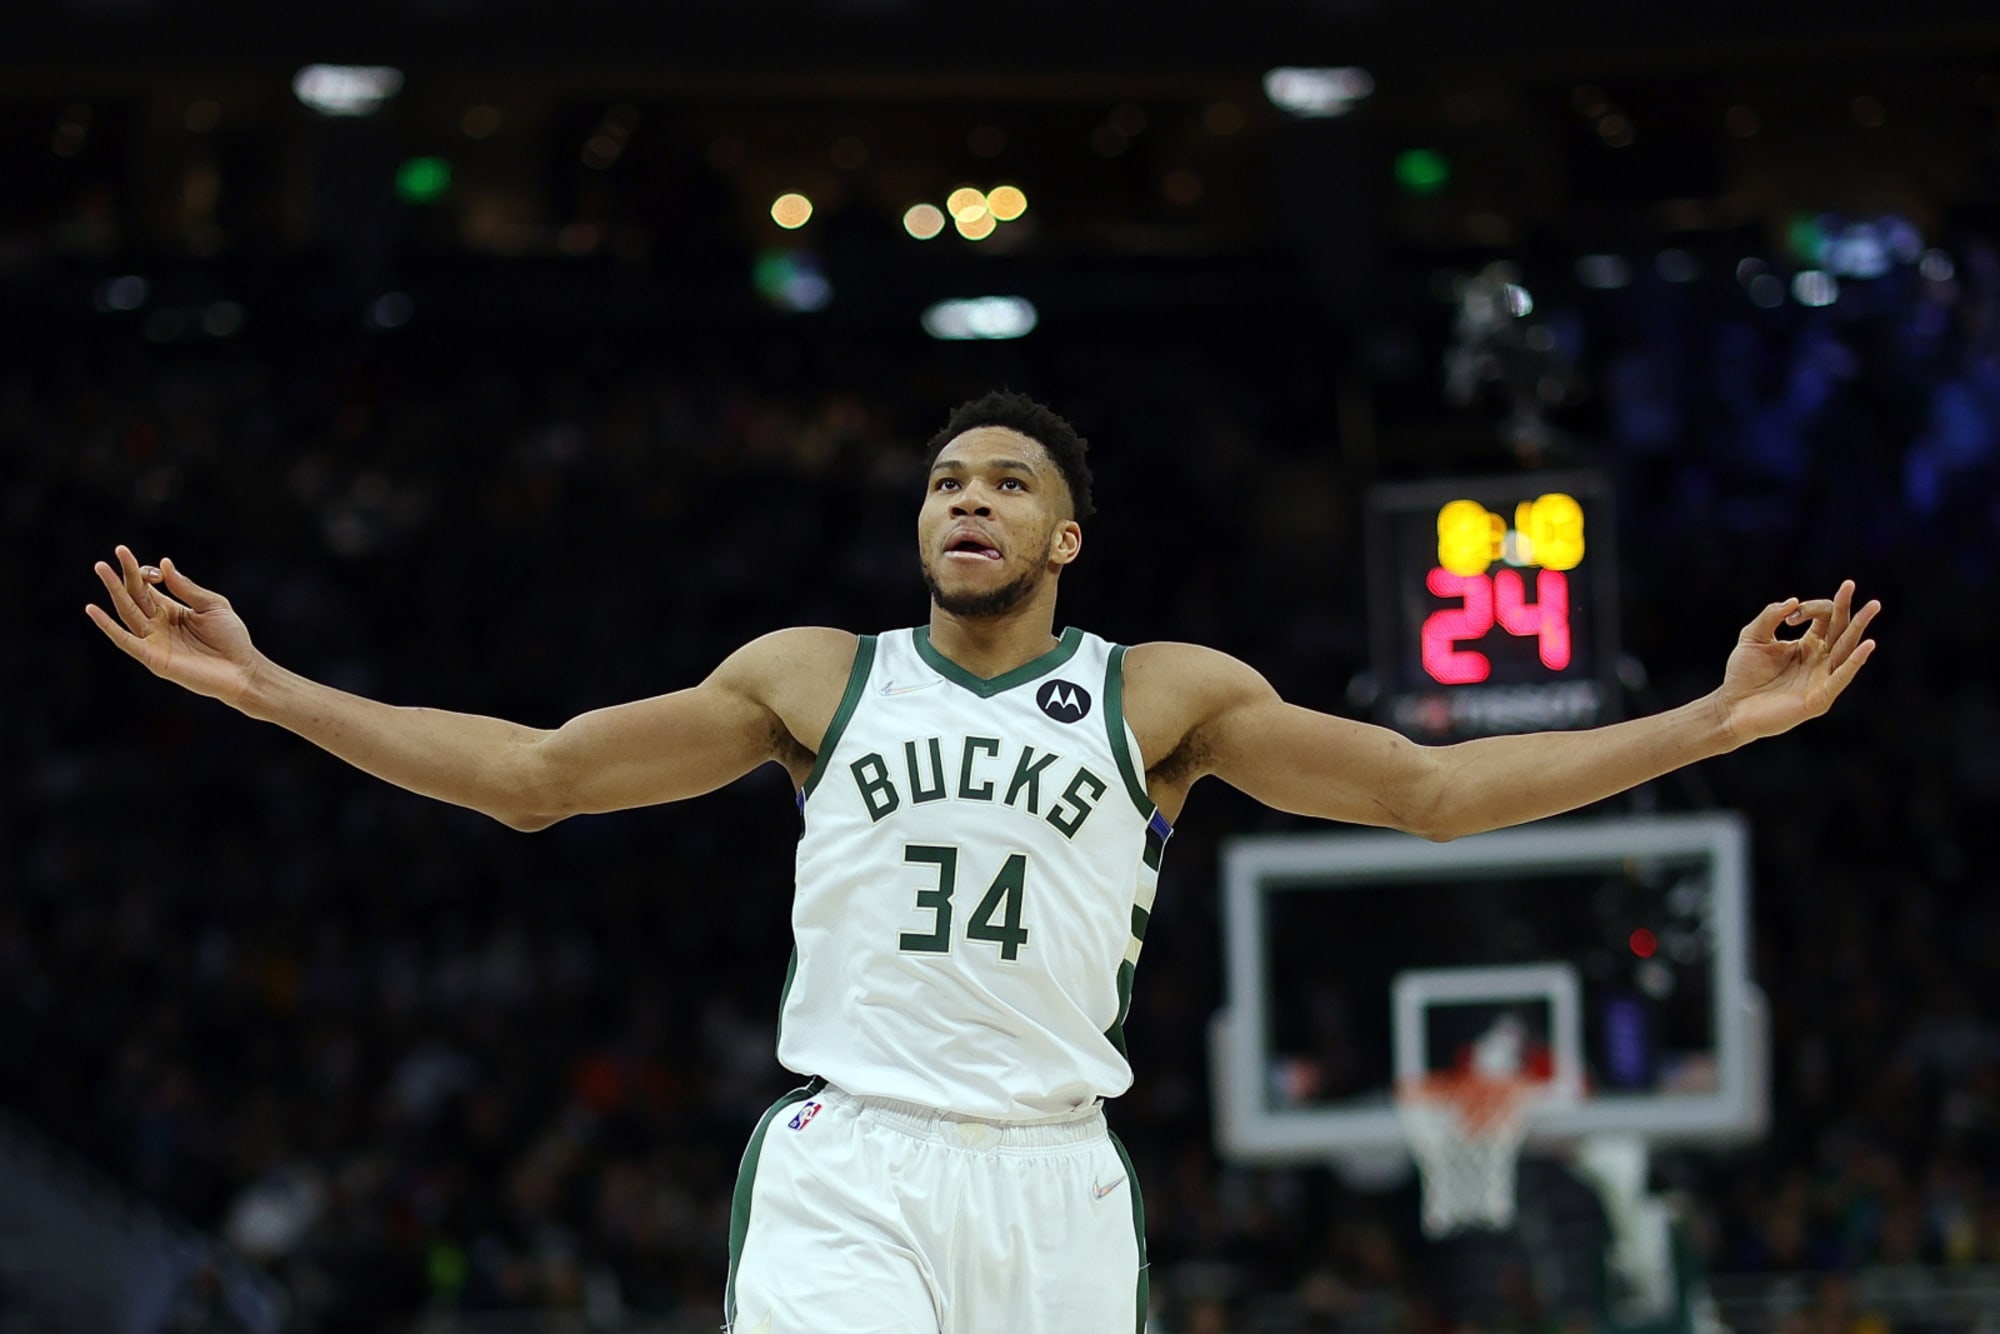 Giannis Antetokounmpo is quickly becoming the clear MVP front runner